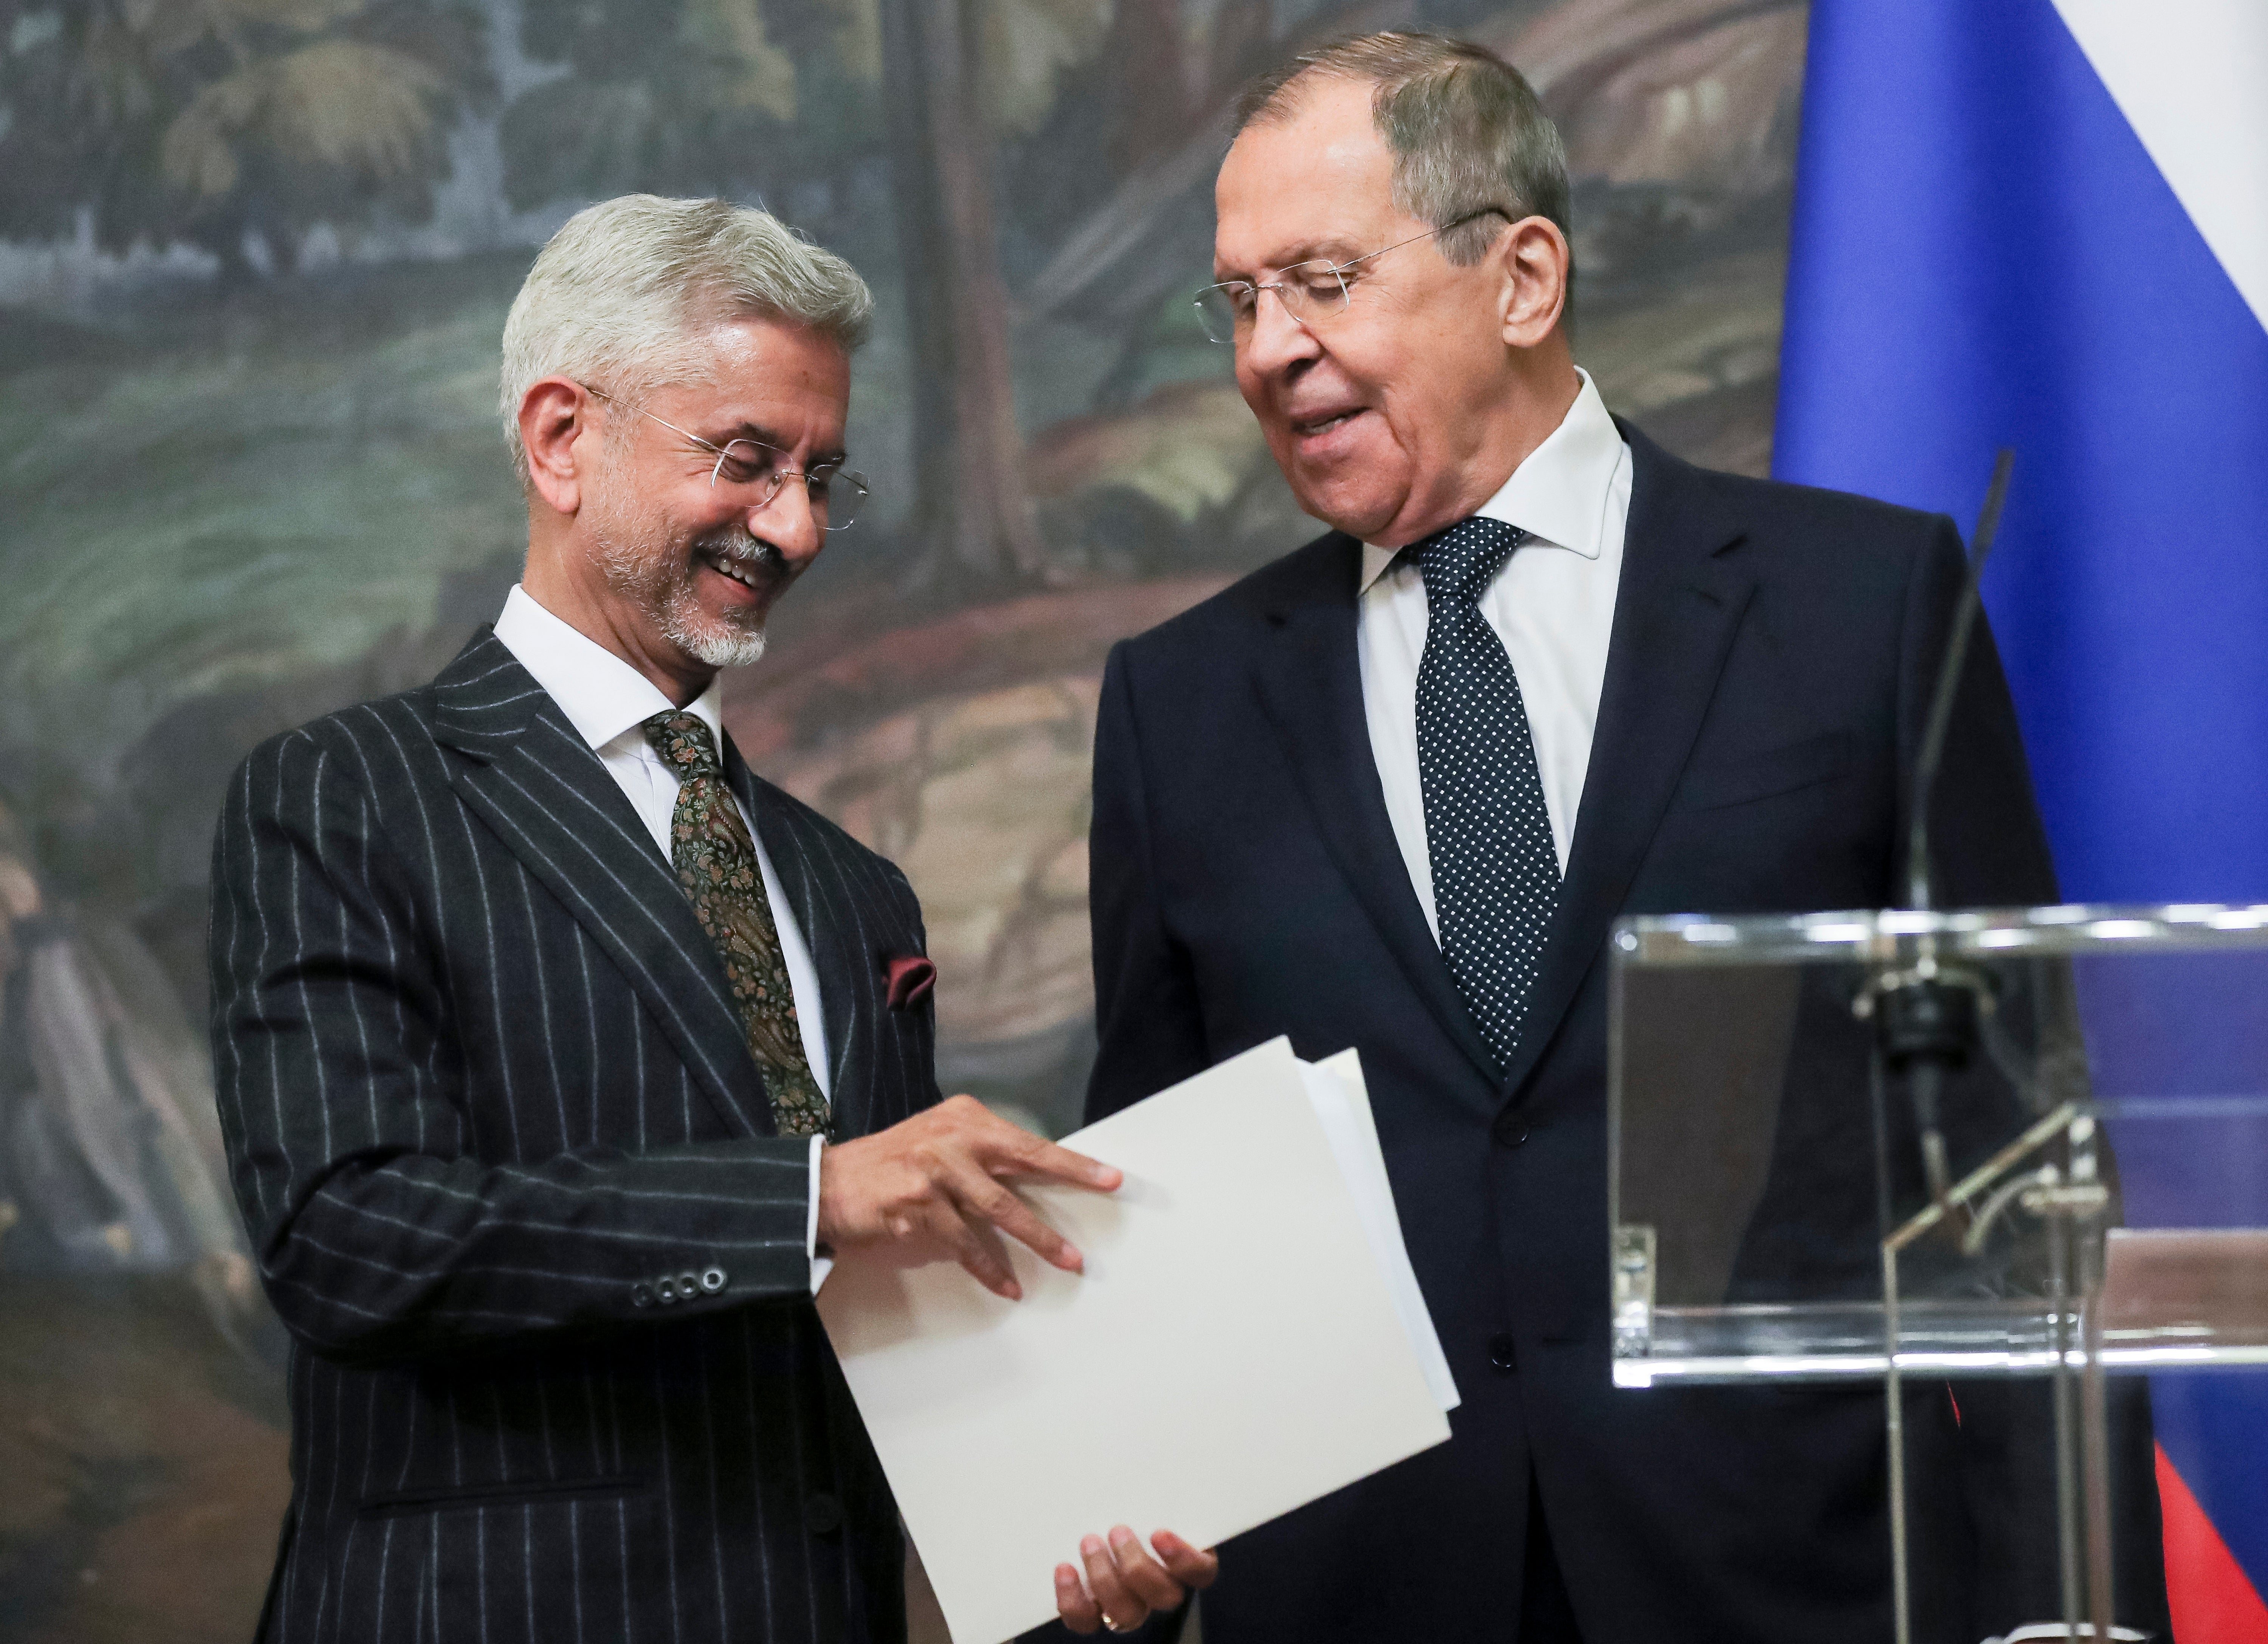 Indian foreign minister Subrahmanyam Jaishankar, left, and Russian Foreign Minister Sergey Lavrov talk to each other after a joint news conference following their talks in Moscow, Russia